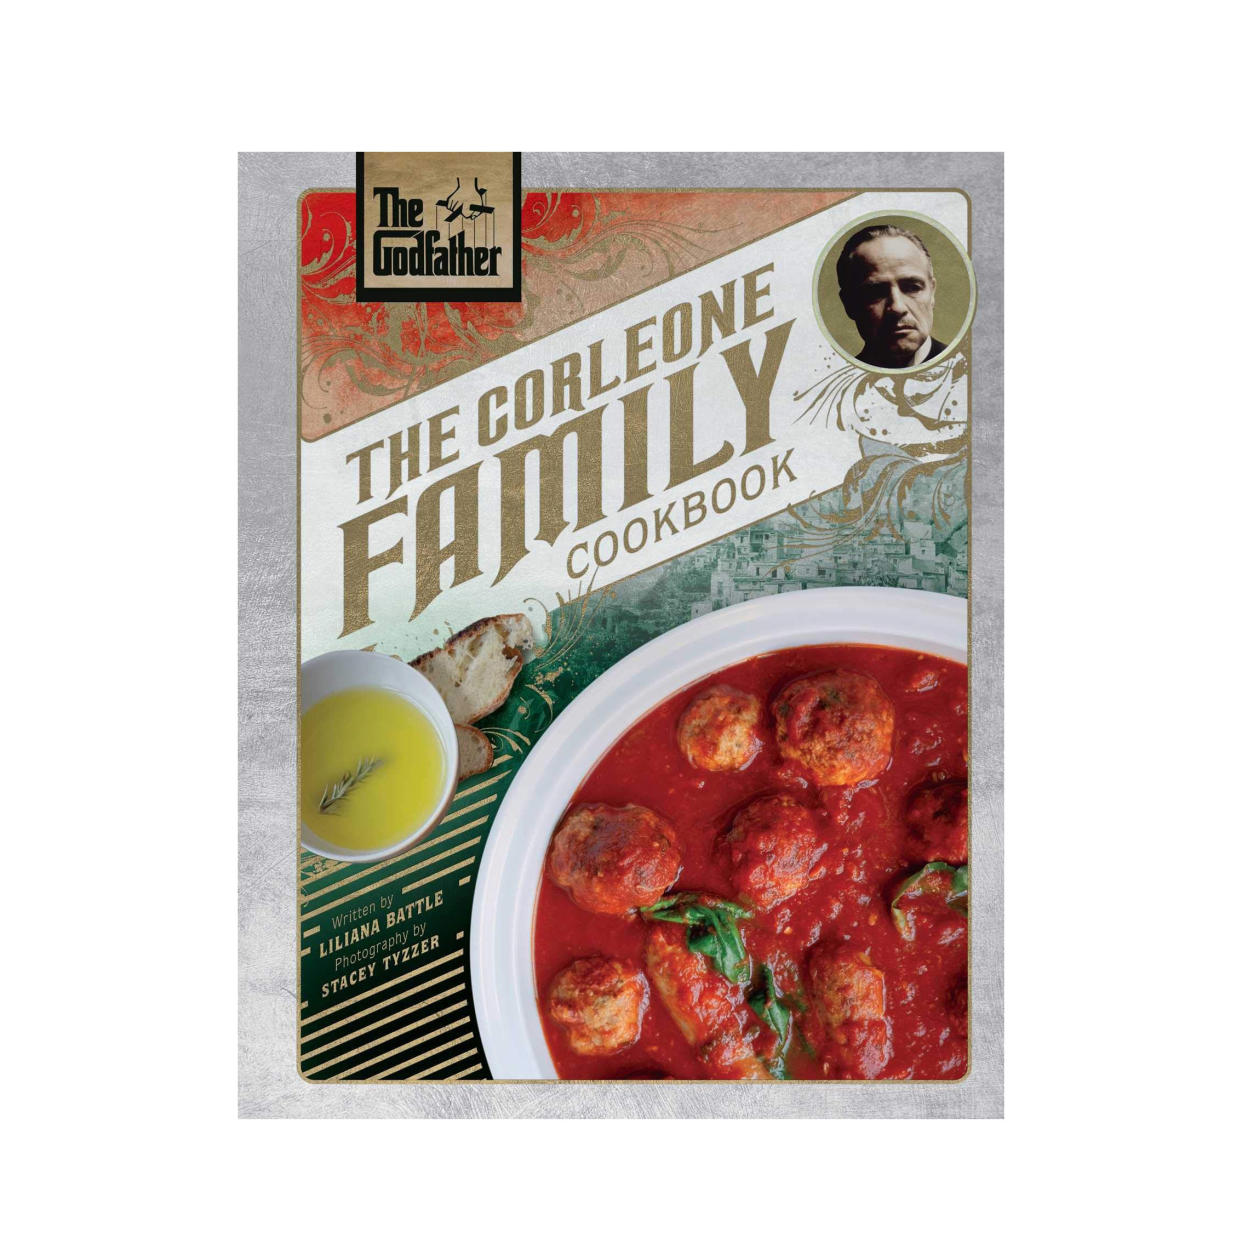 The Corleone Family Cookbook by Liliana Battle and Stacey Tyzzer